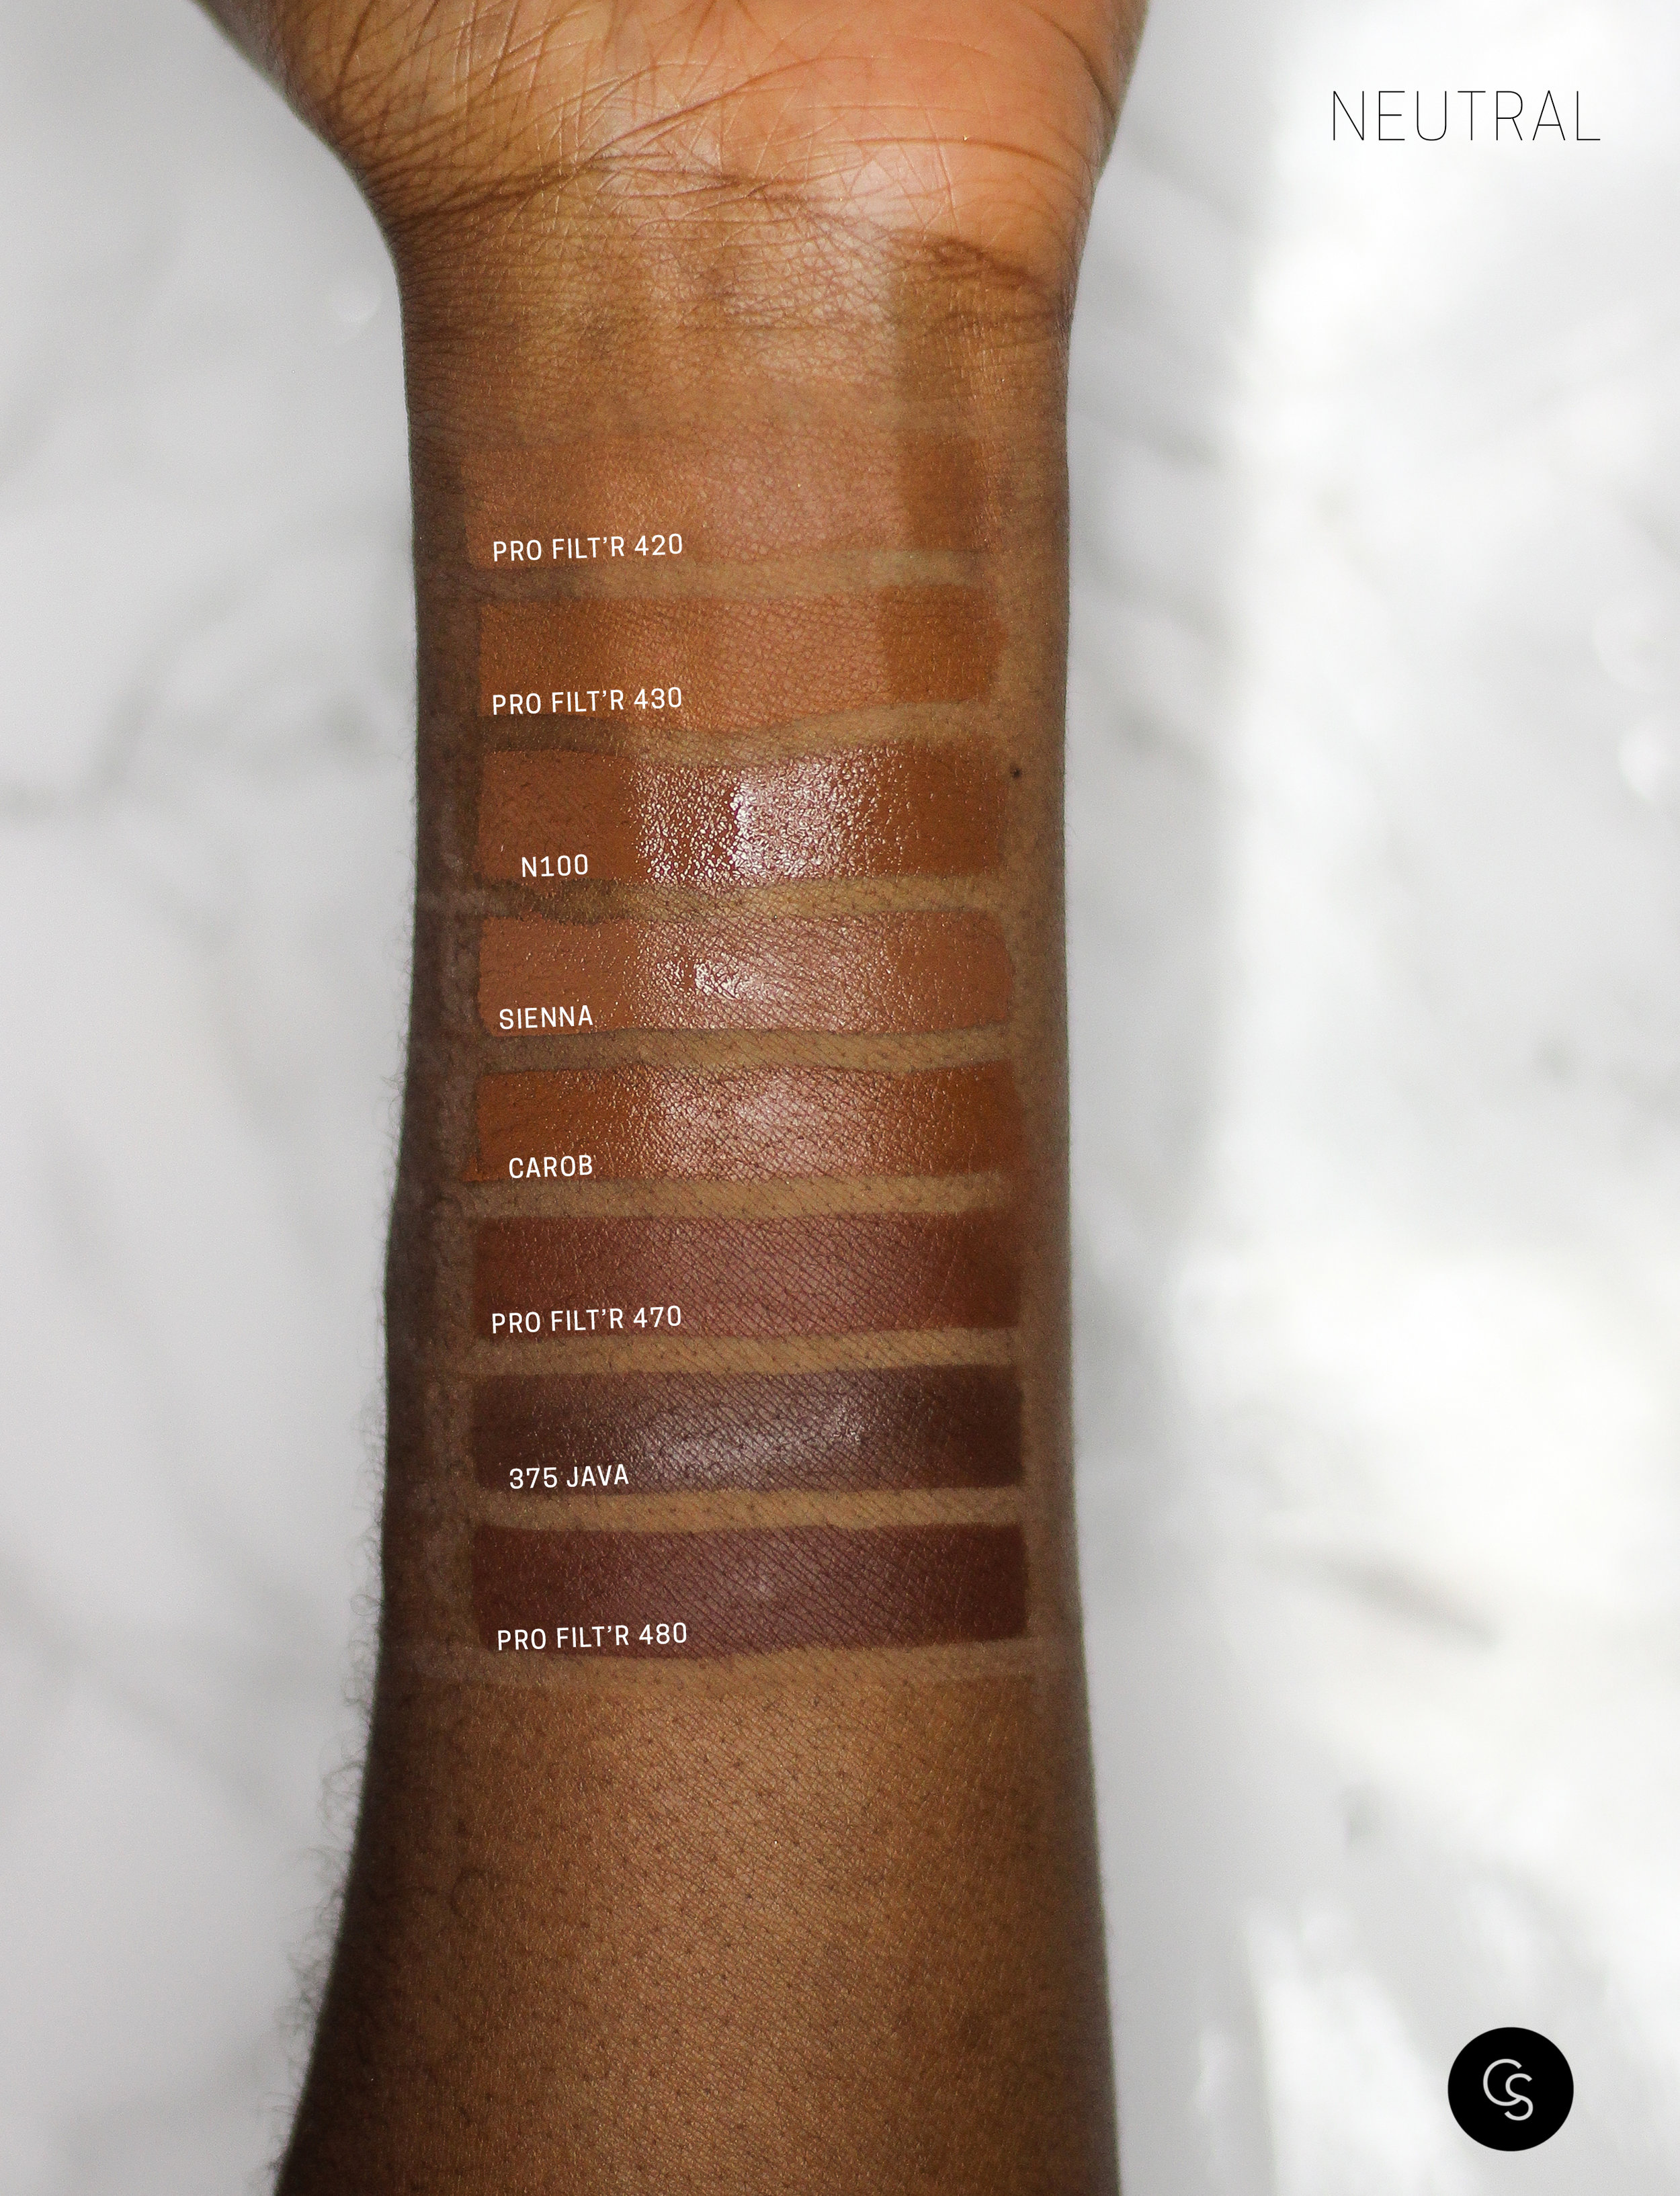 Fenty's foundation finder filter that helps you find your perfect